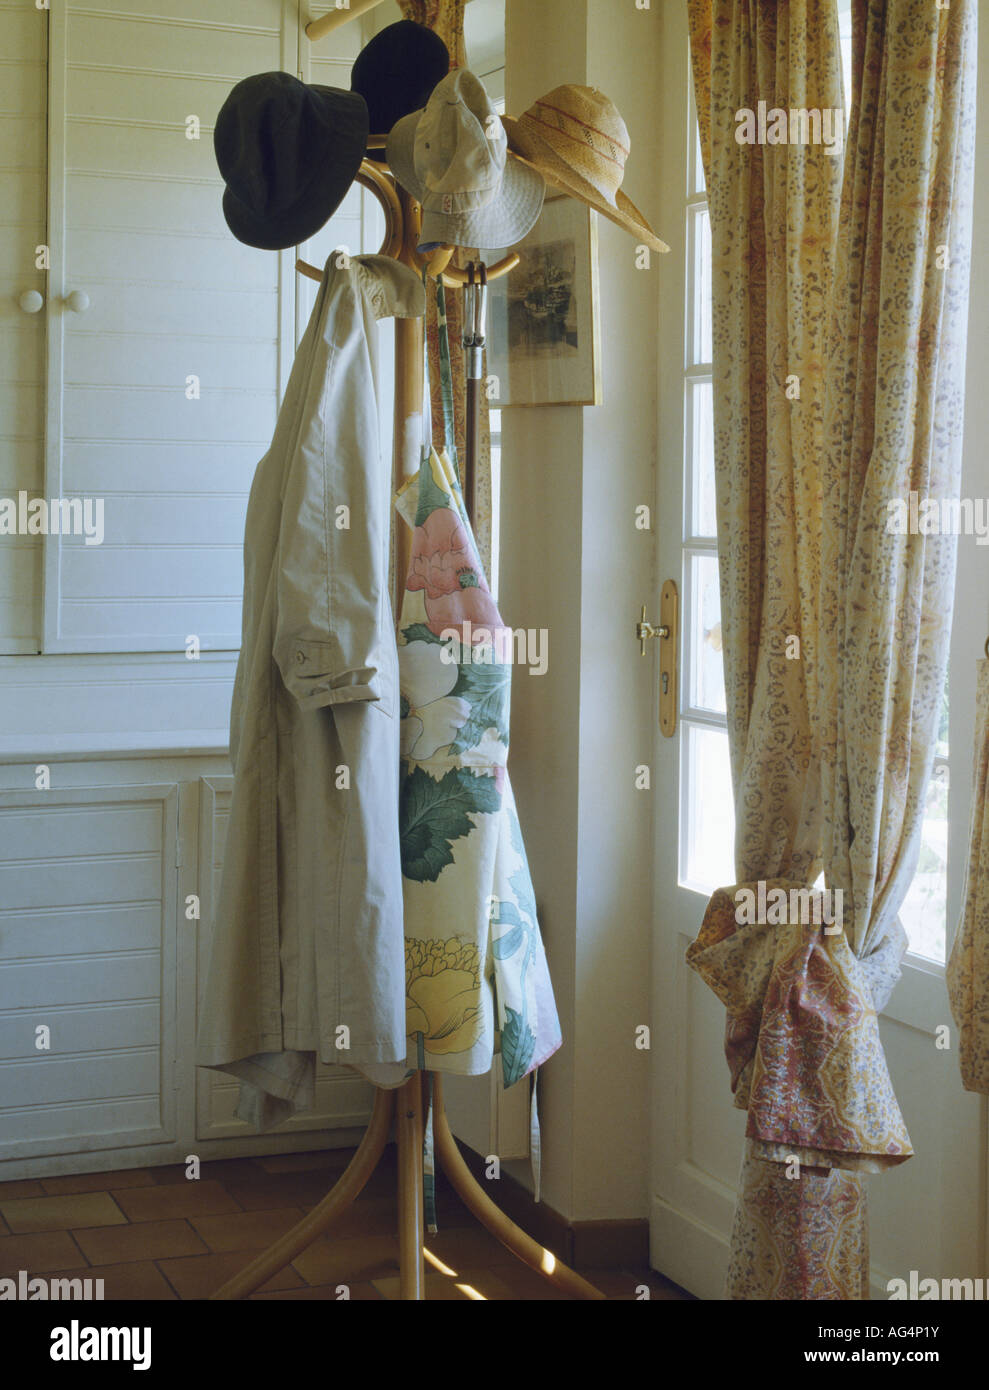 Coats and hats on bentwood hatstand in hall with neutral curtain Stock Photo